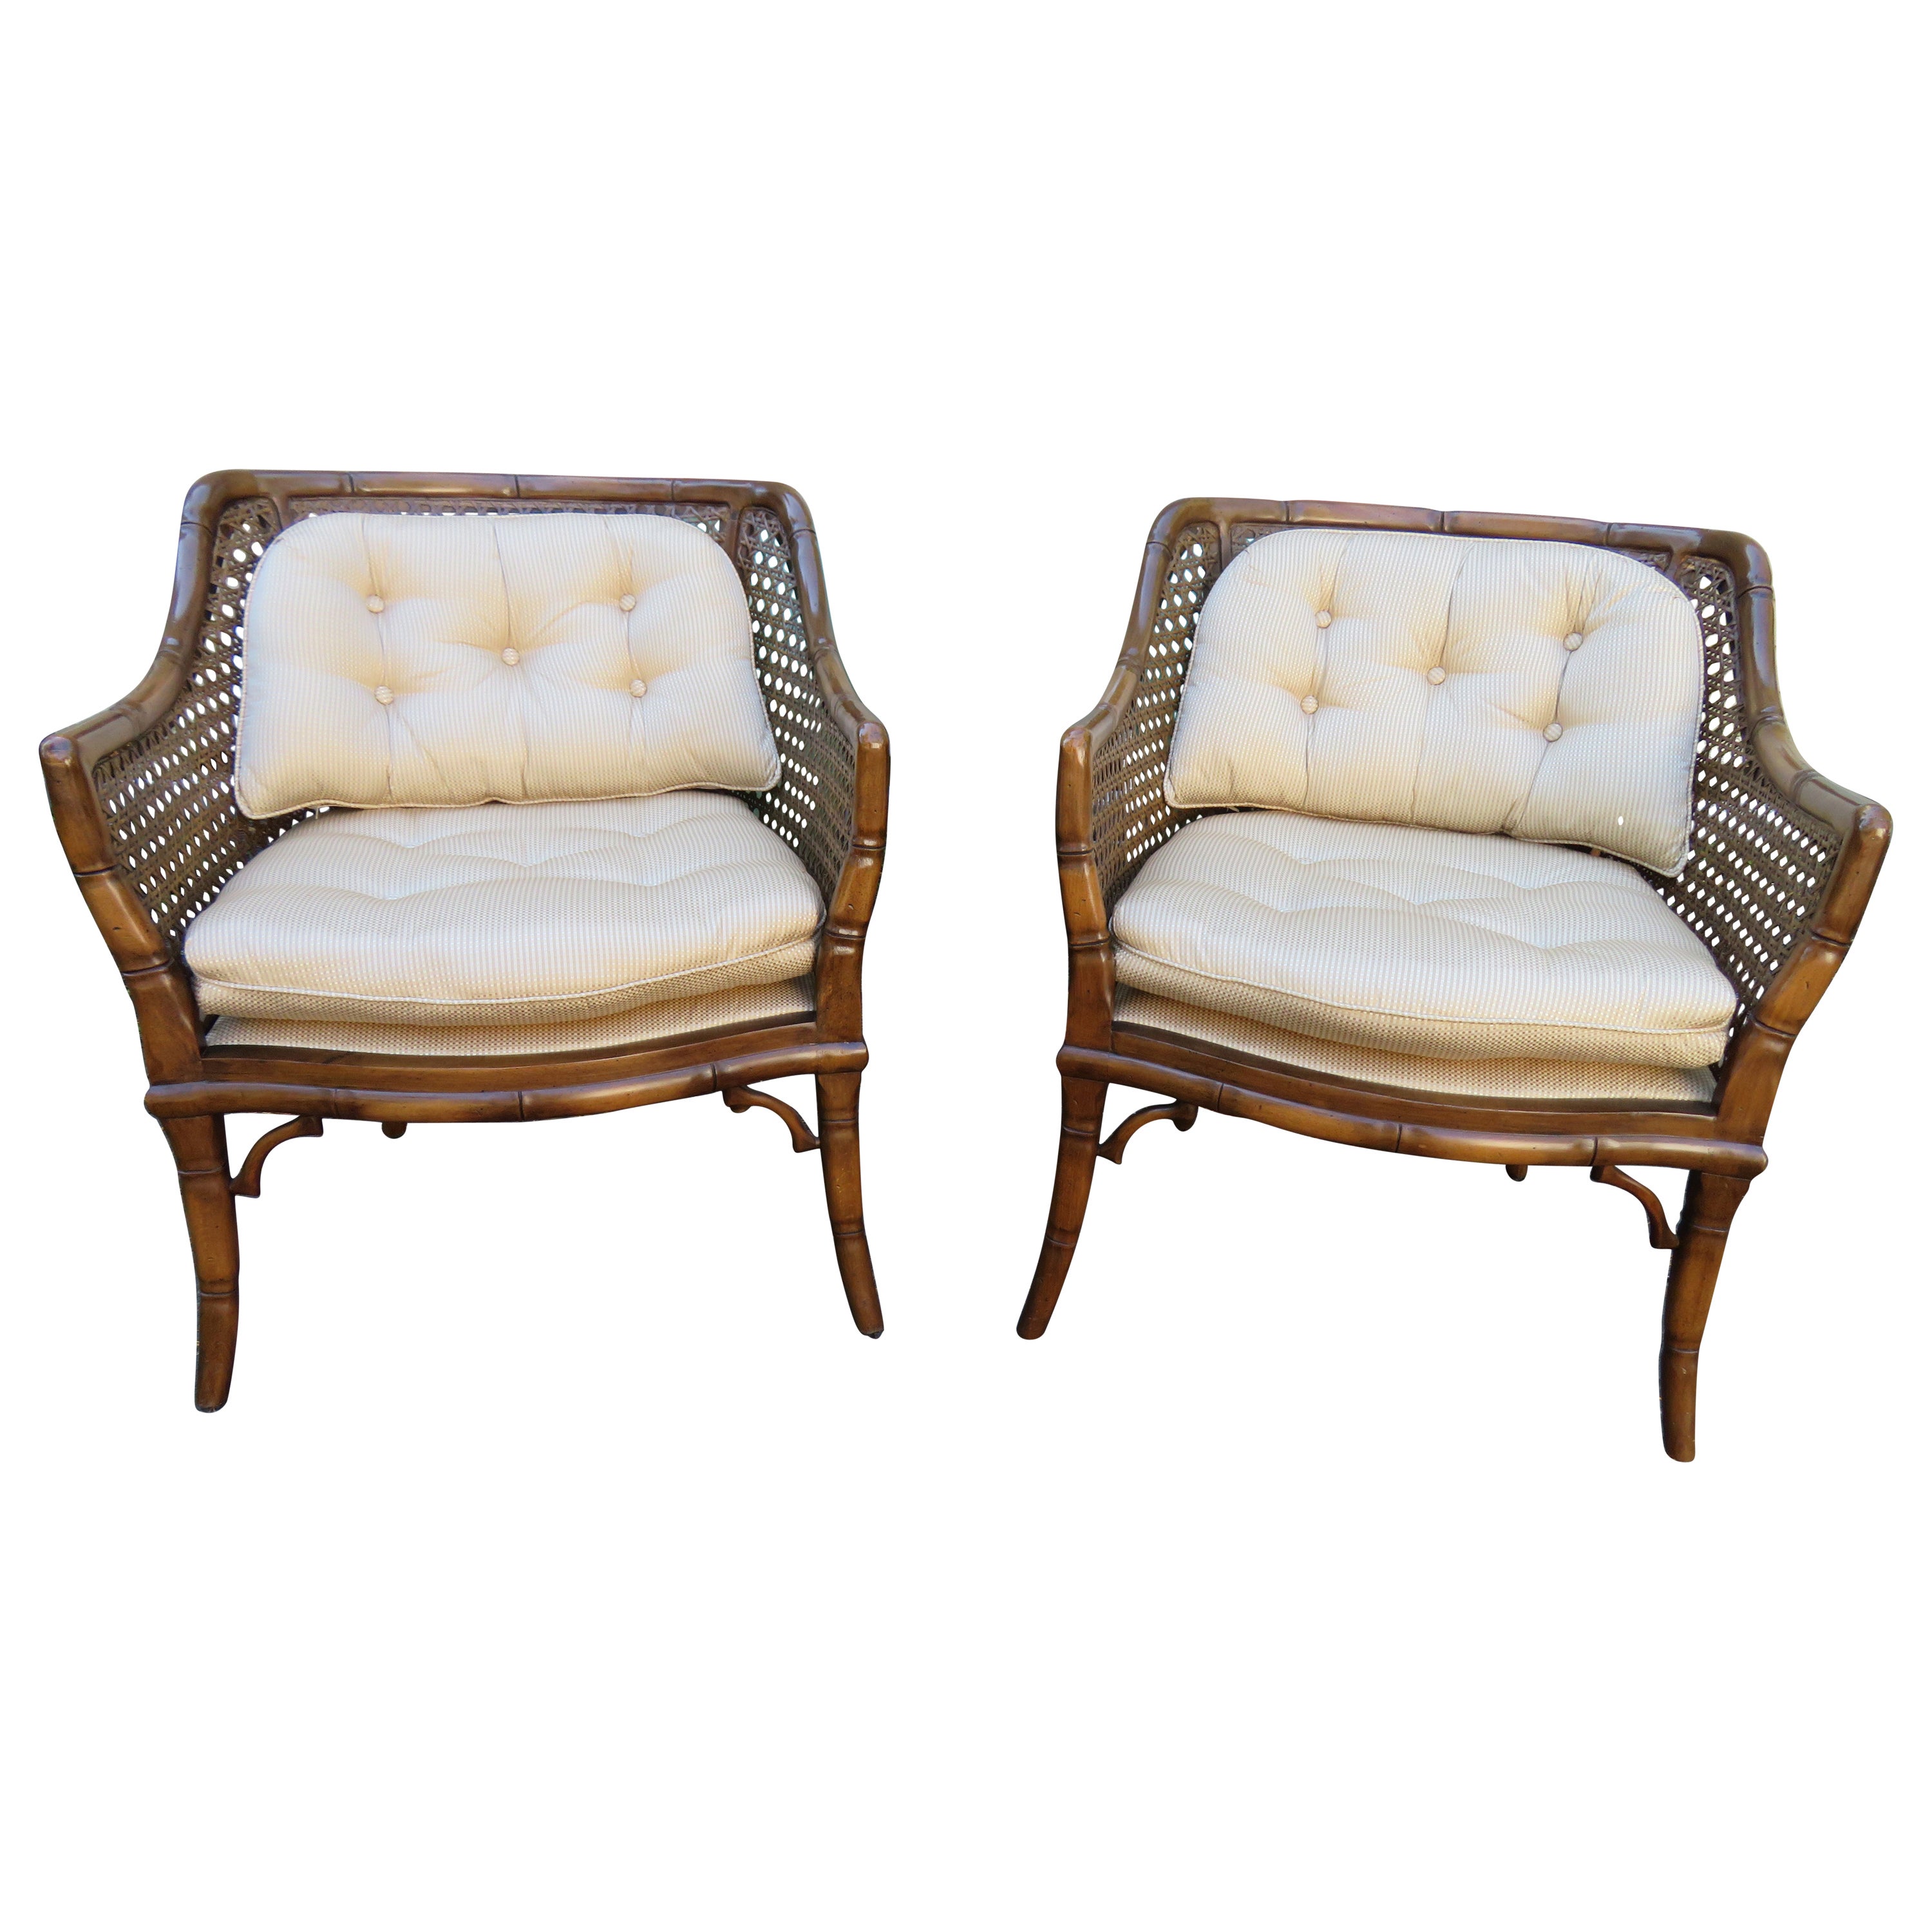 Handsome Pair French Country Walnut Faux Bamboo Caned Club Accent Chairs